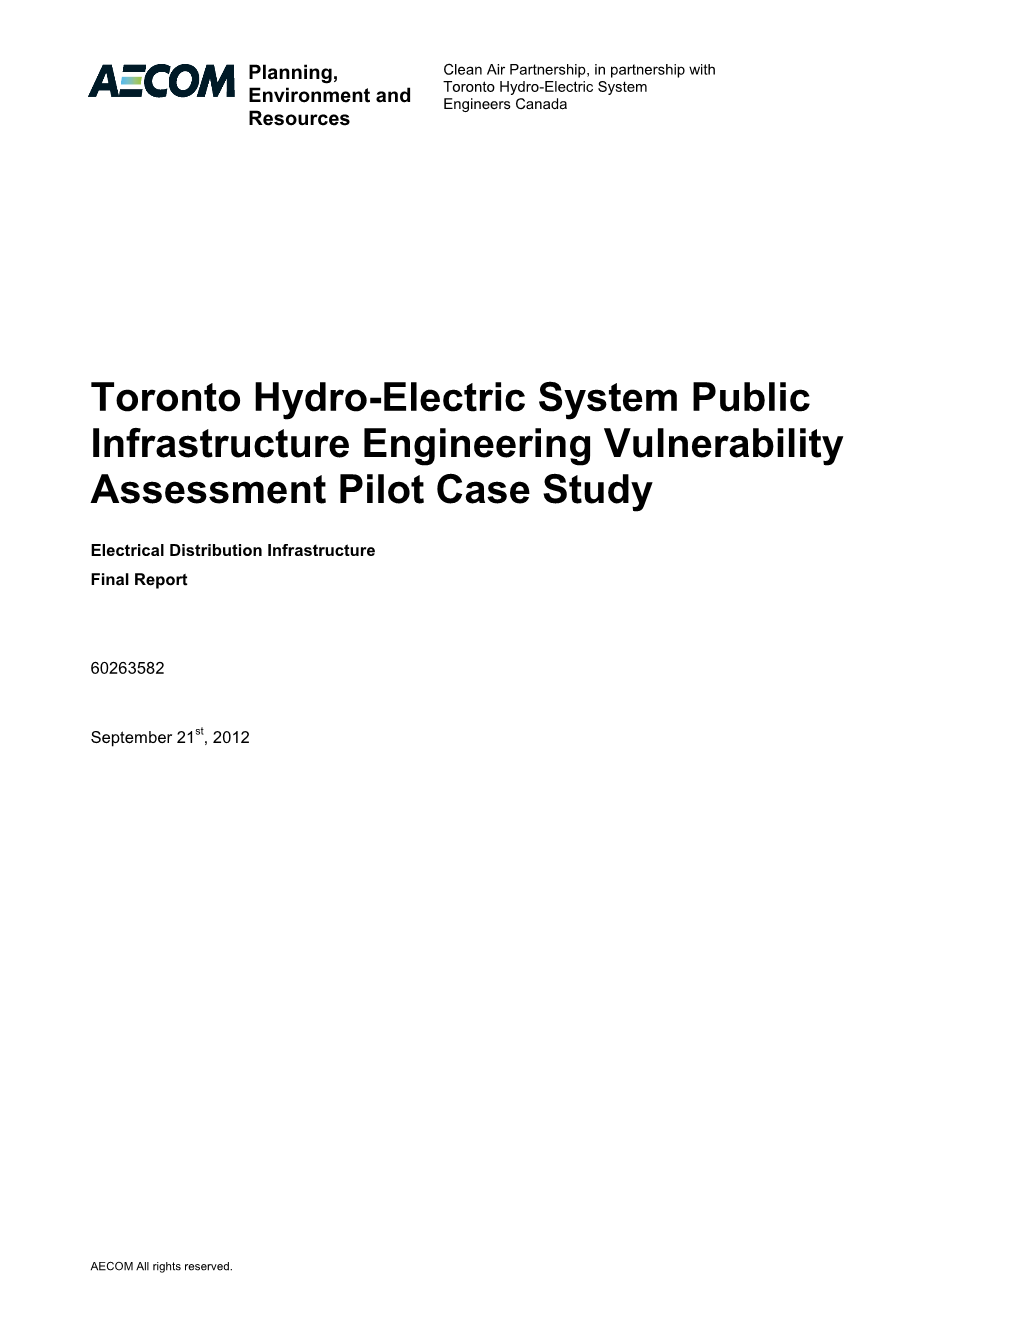 Toronto Hydro-Electric System Public Infrastructure Engineering Vulnerability Assessment Pilot Case Study